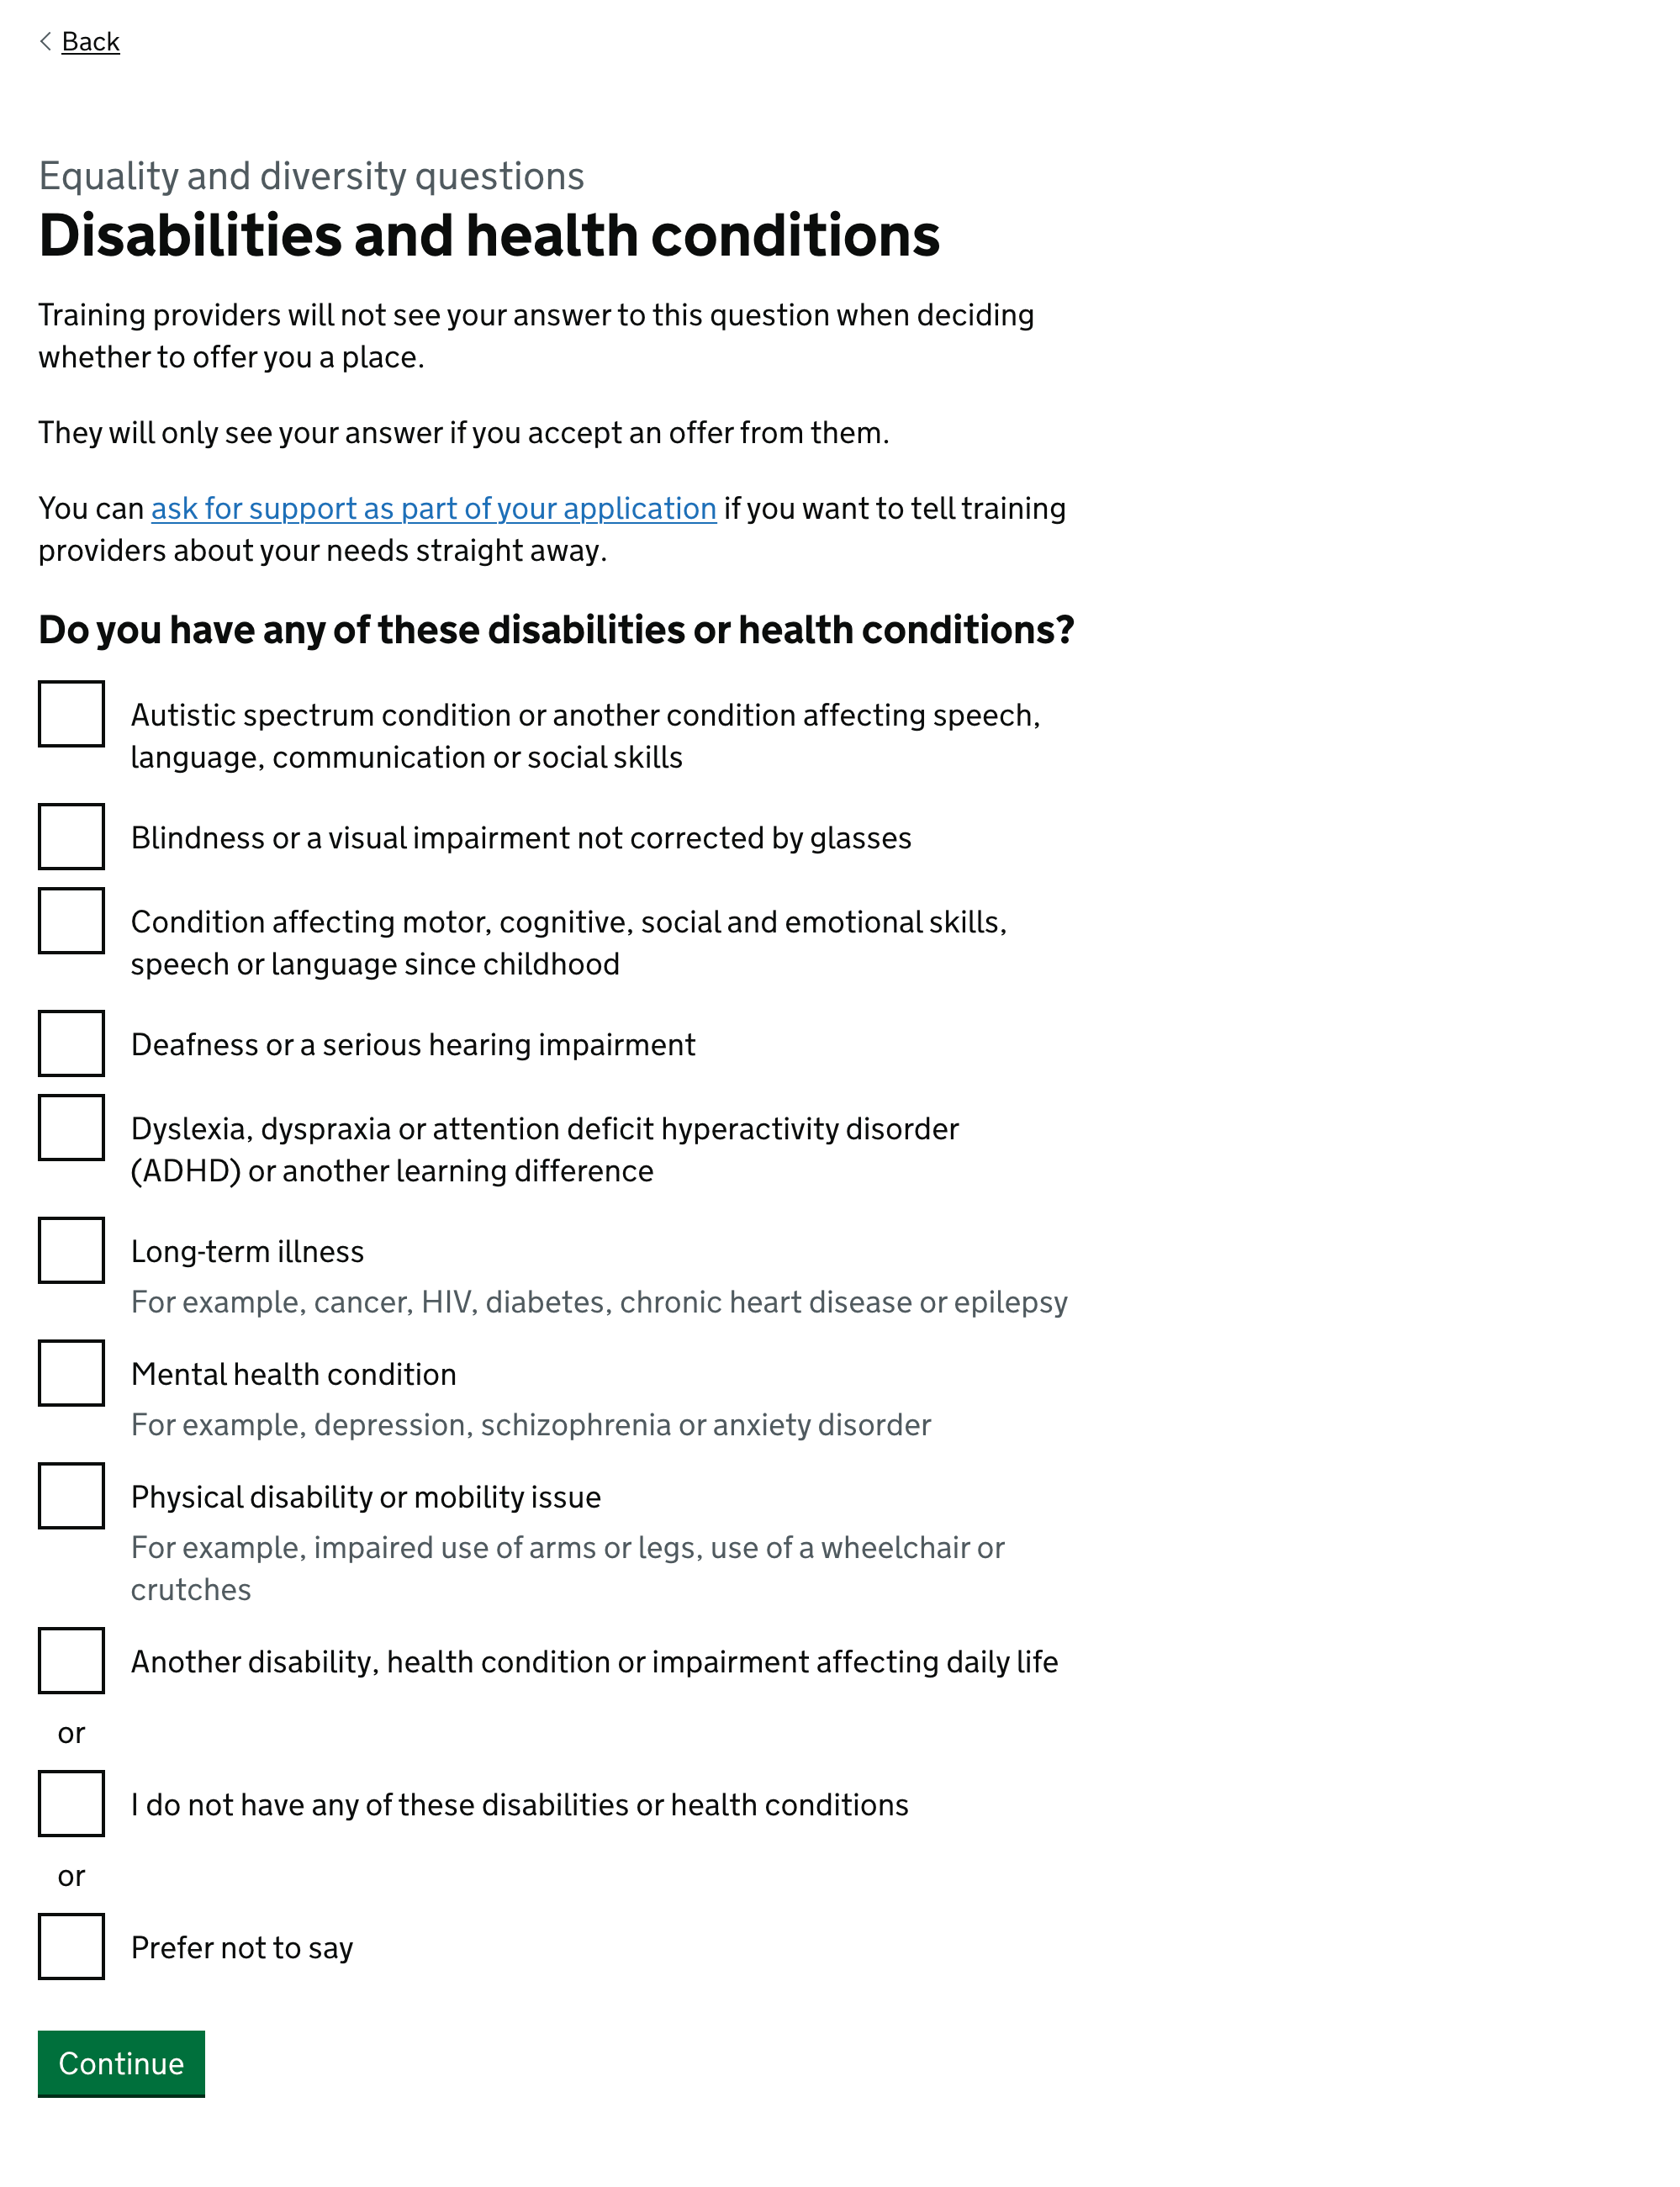 Screenshot showing page with the question ‘Do you have any of these disabilities or health conditions?’